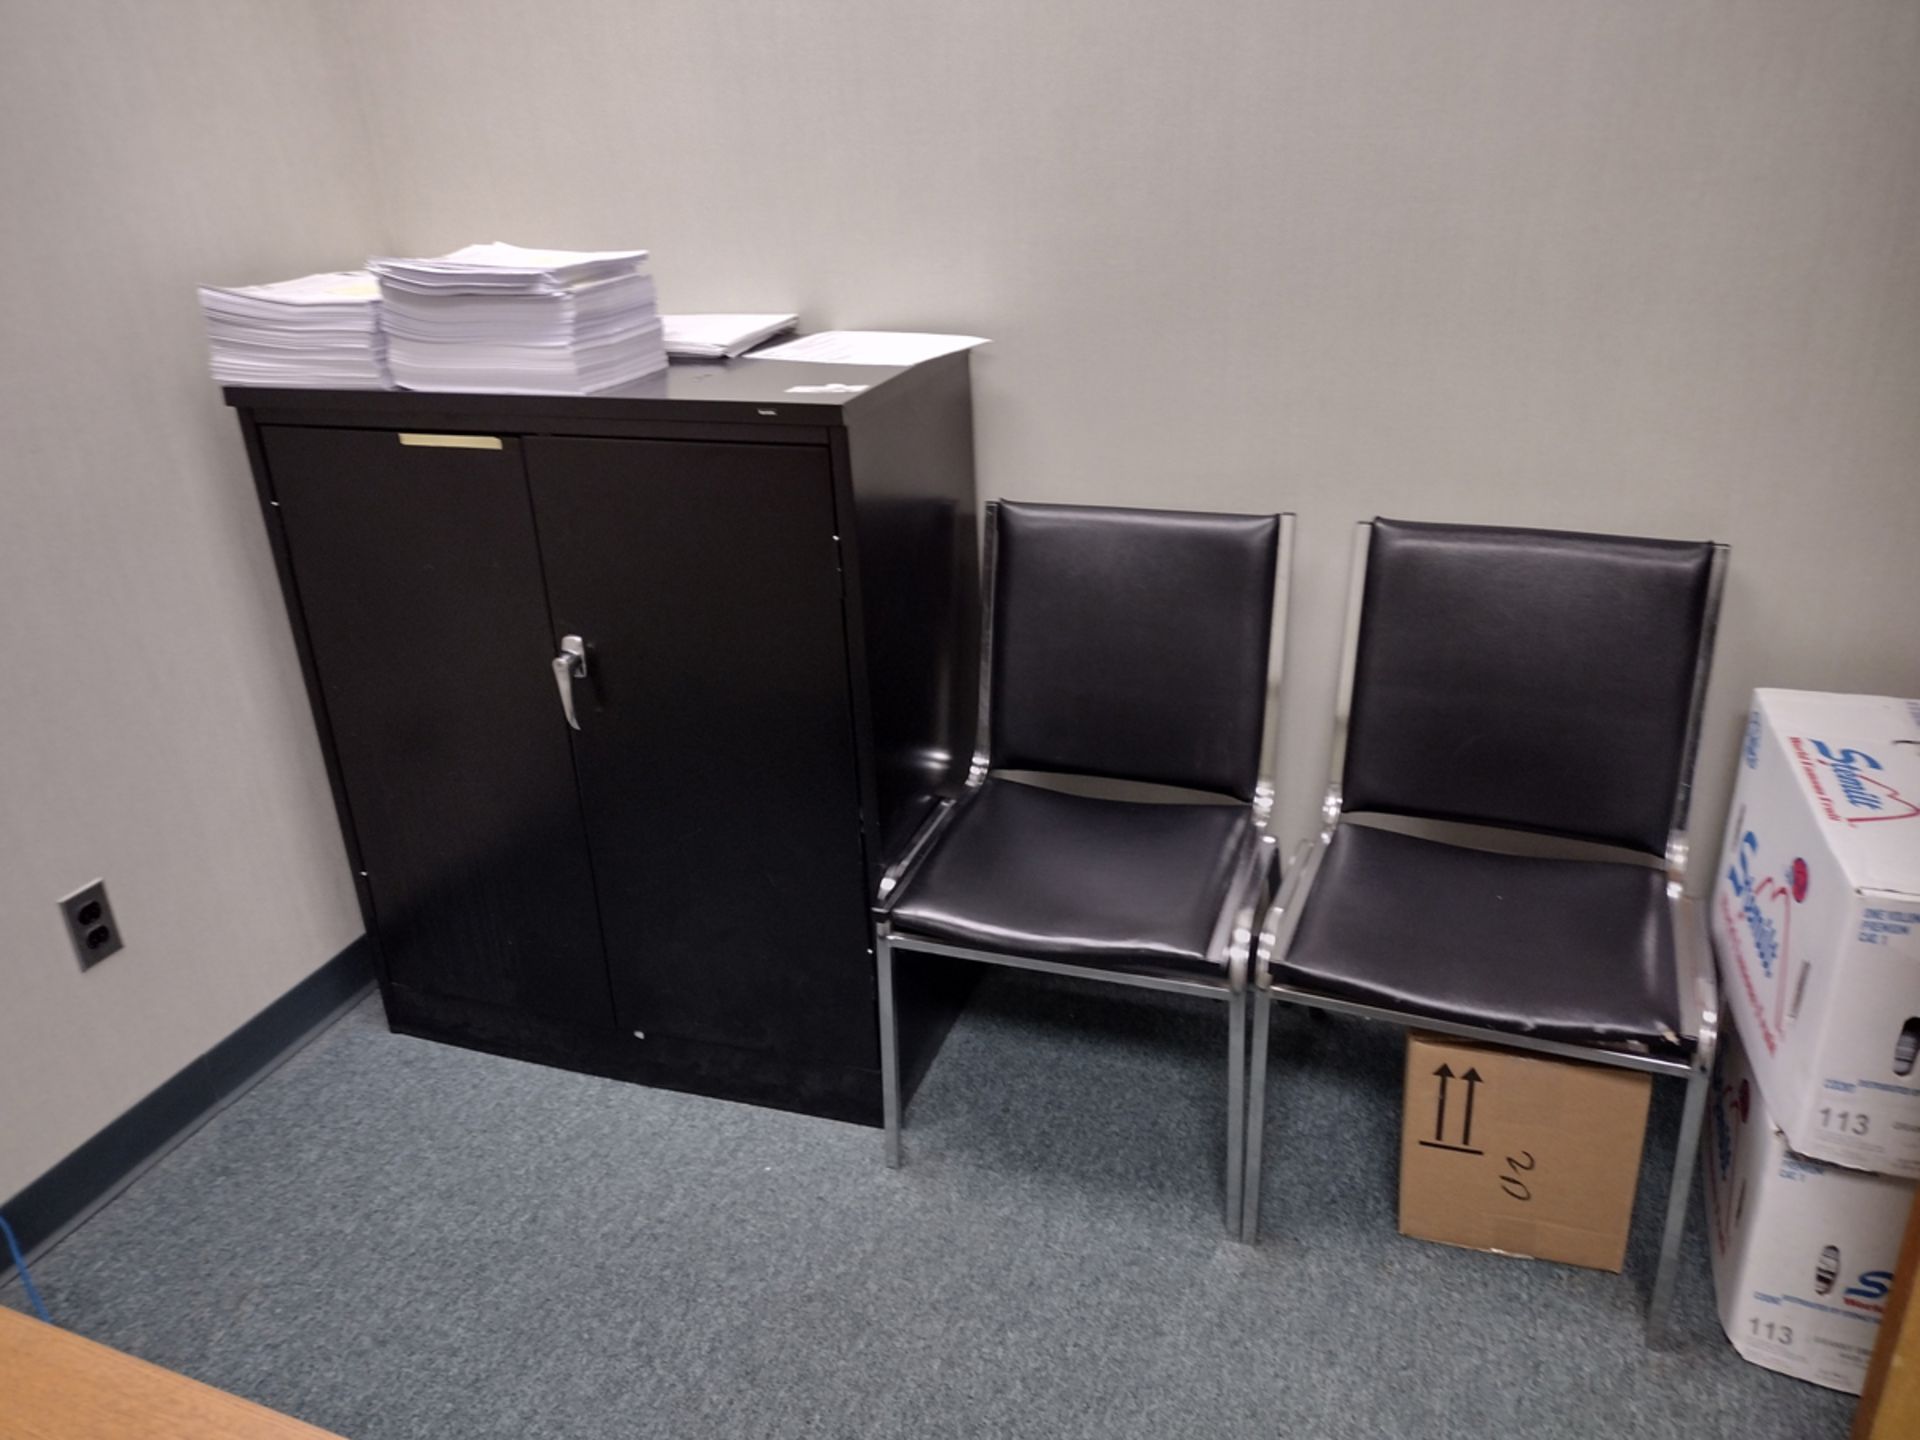 Group of Office Furniture Throughout Rooms - Image 4 of 17